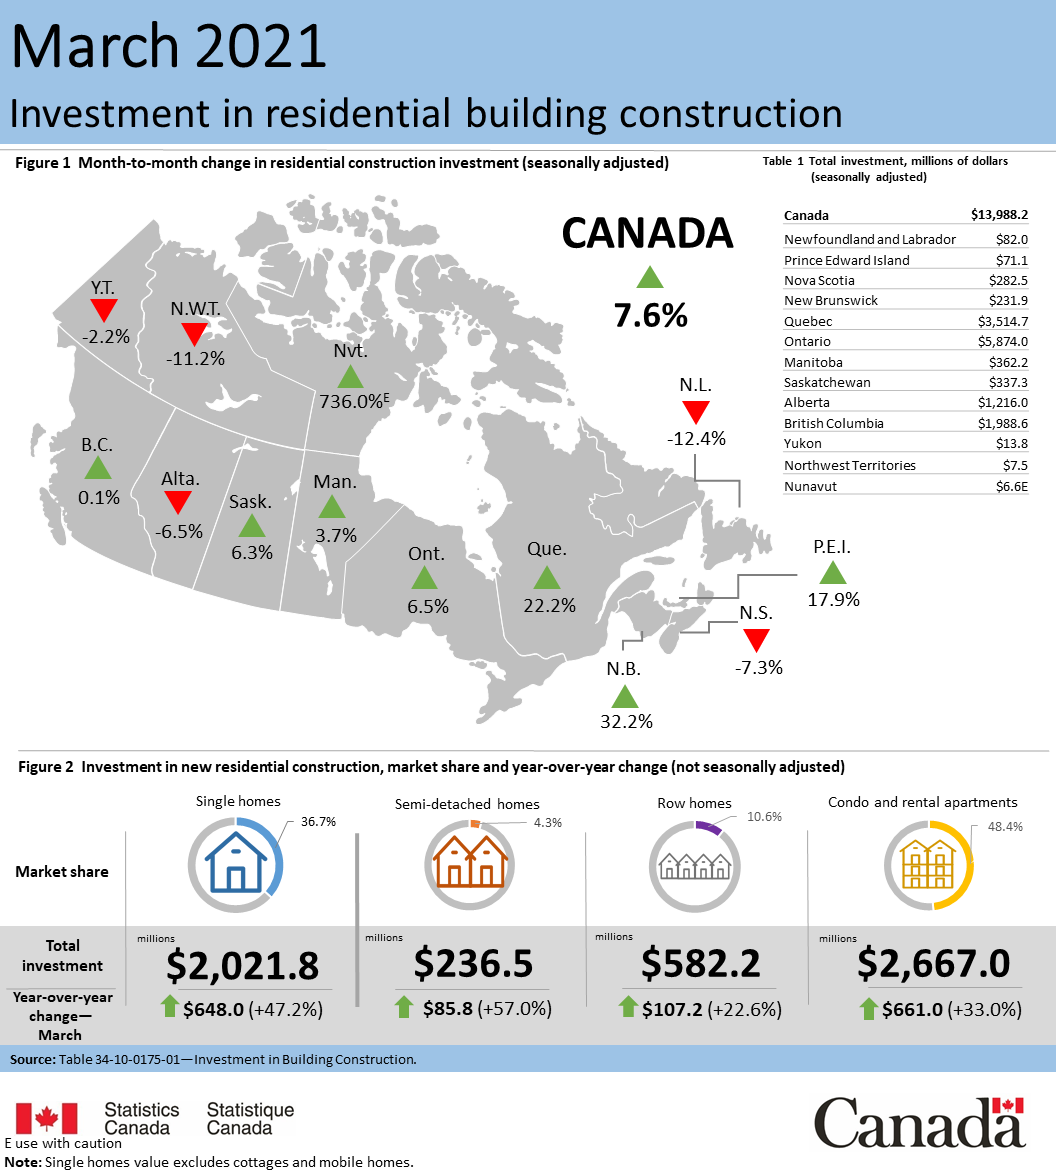 Thumbnail for Infographic 1: Investment in residential building construction, March 2021